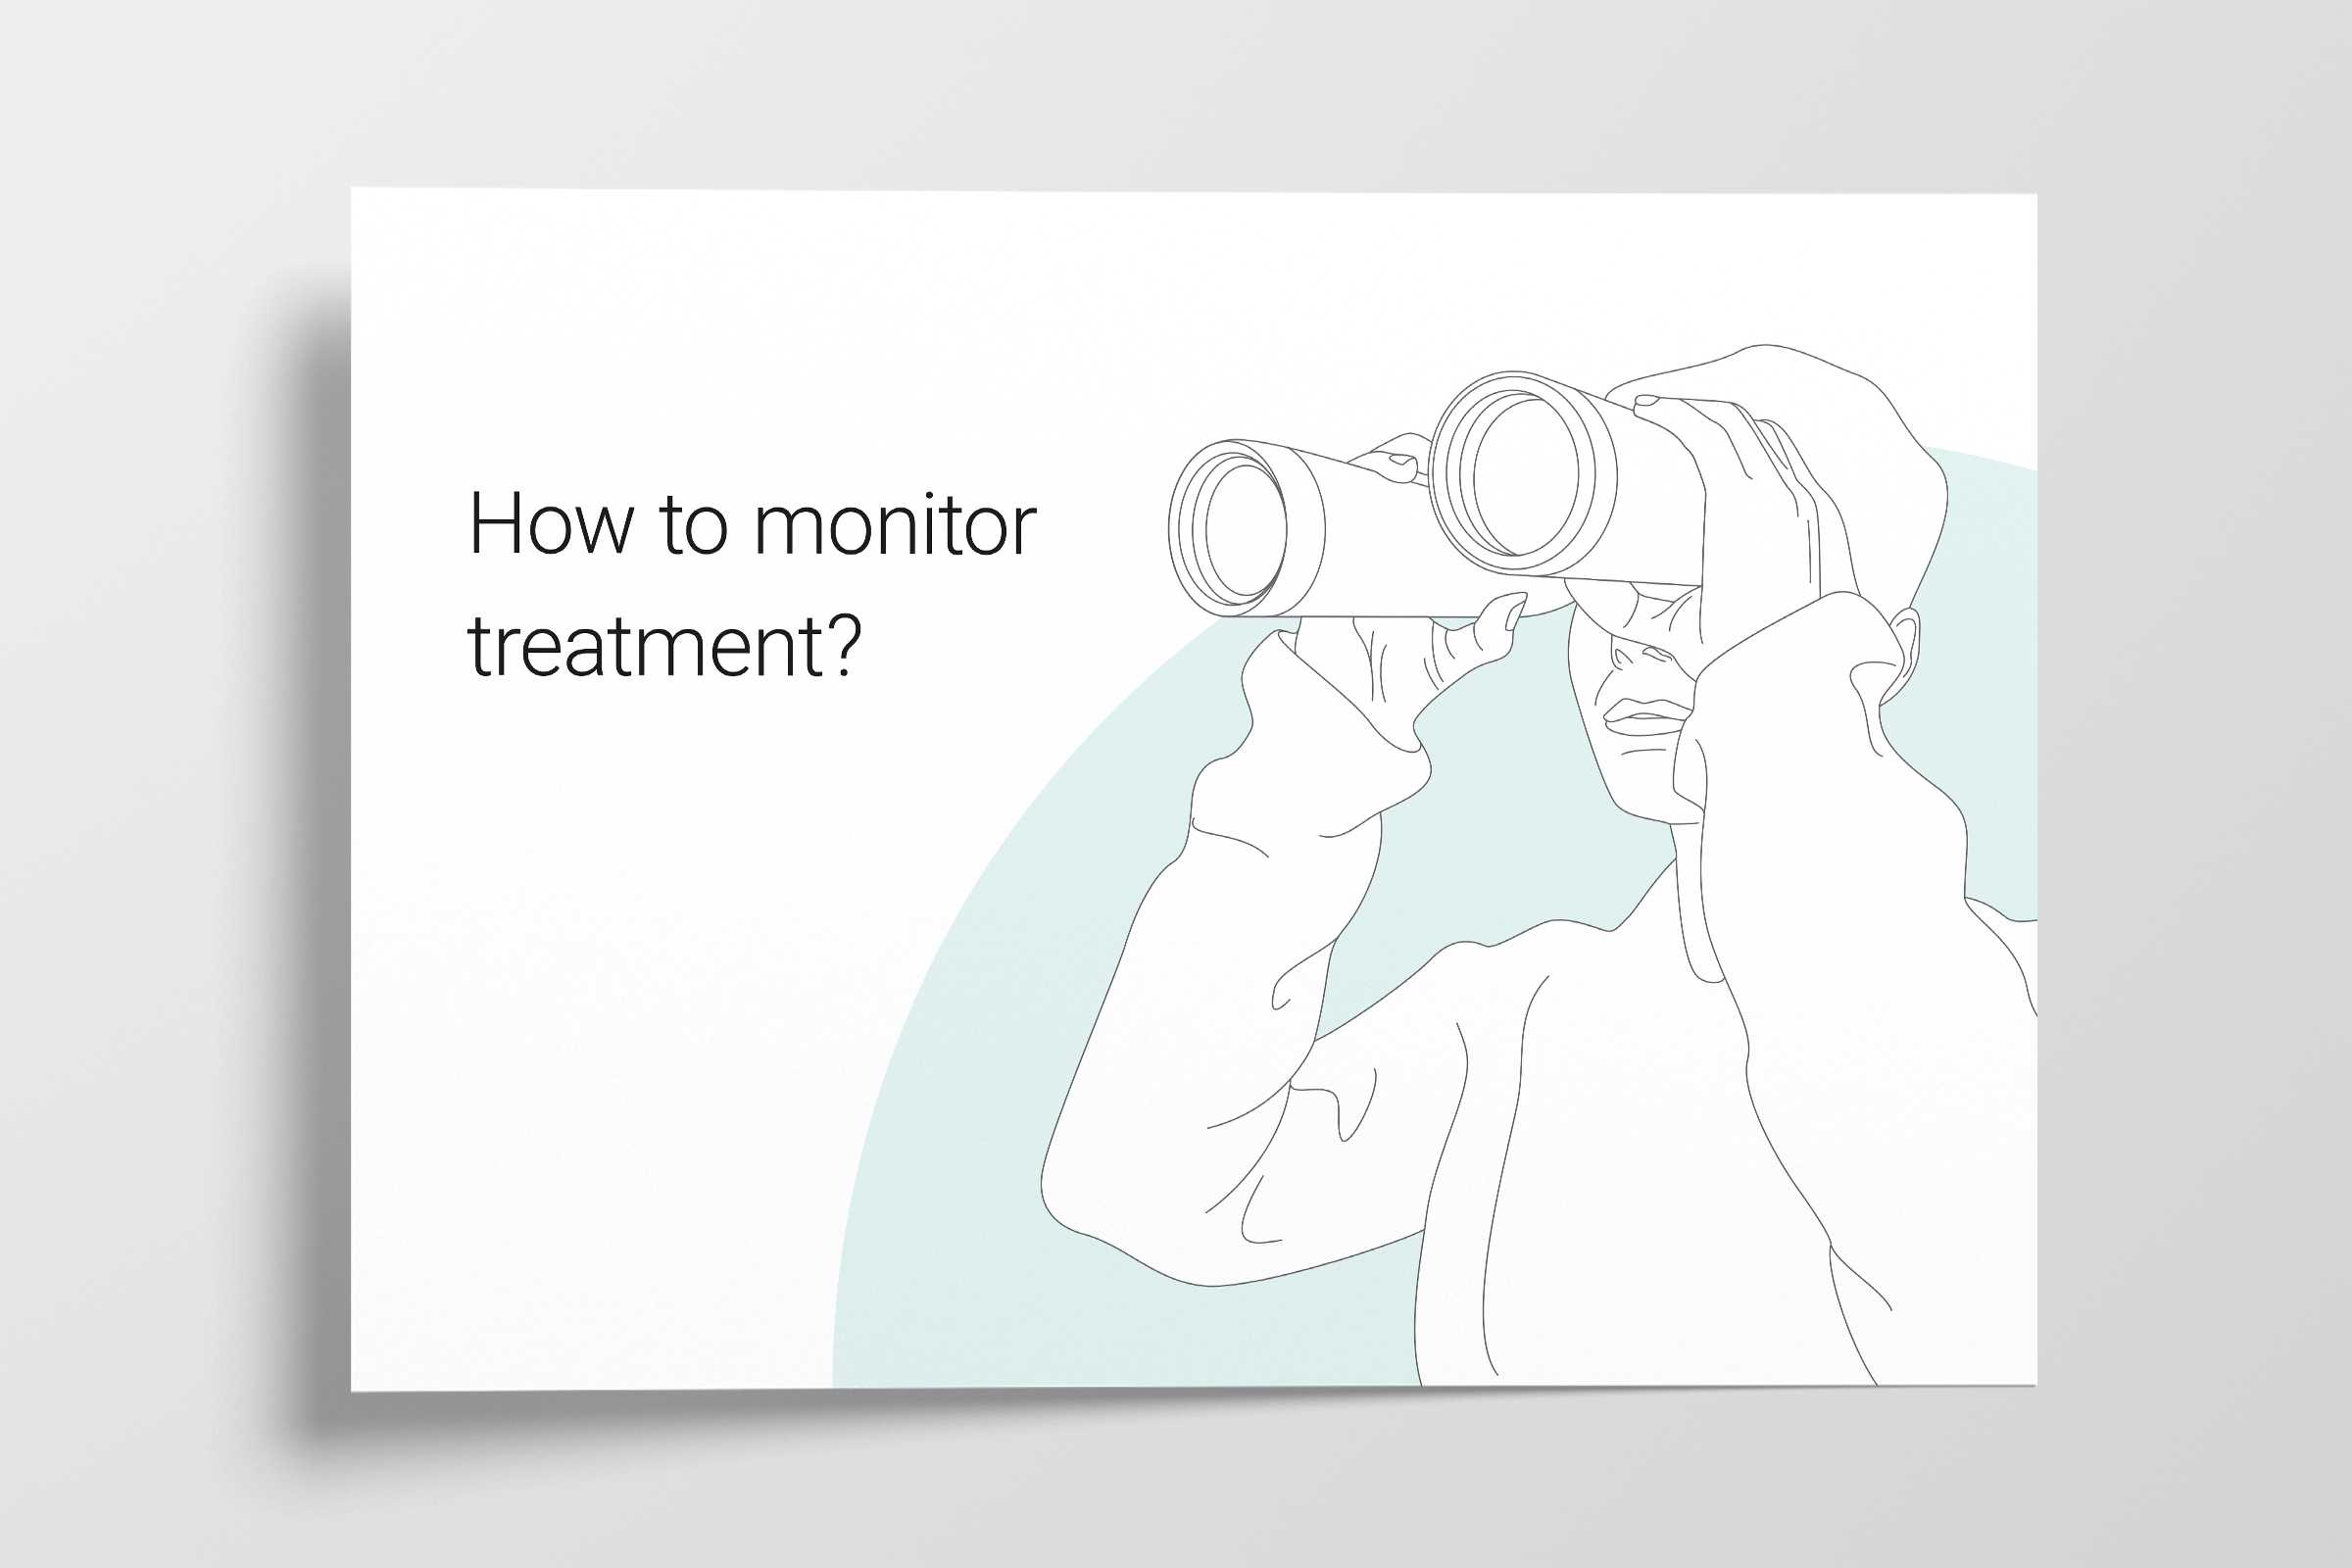 Illustration for the chapter "How should I monitor patients on NIV?"